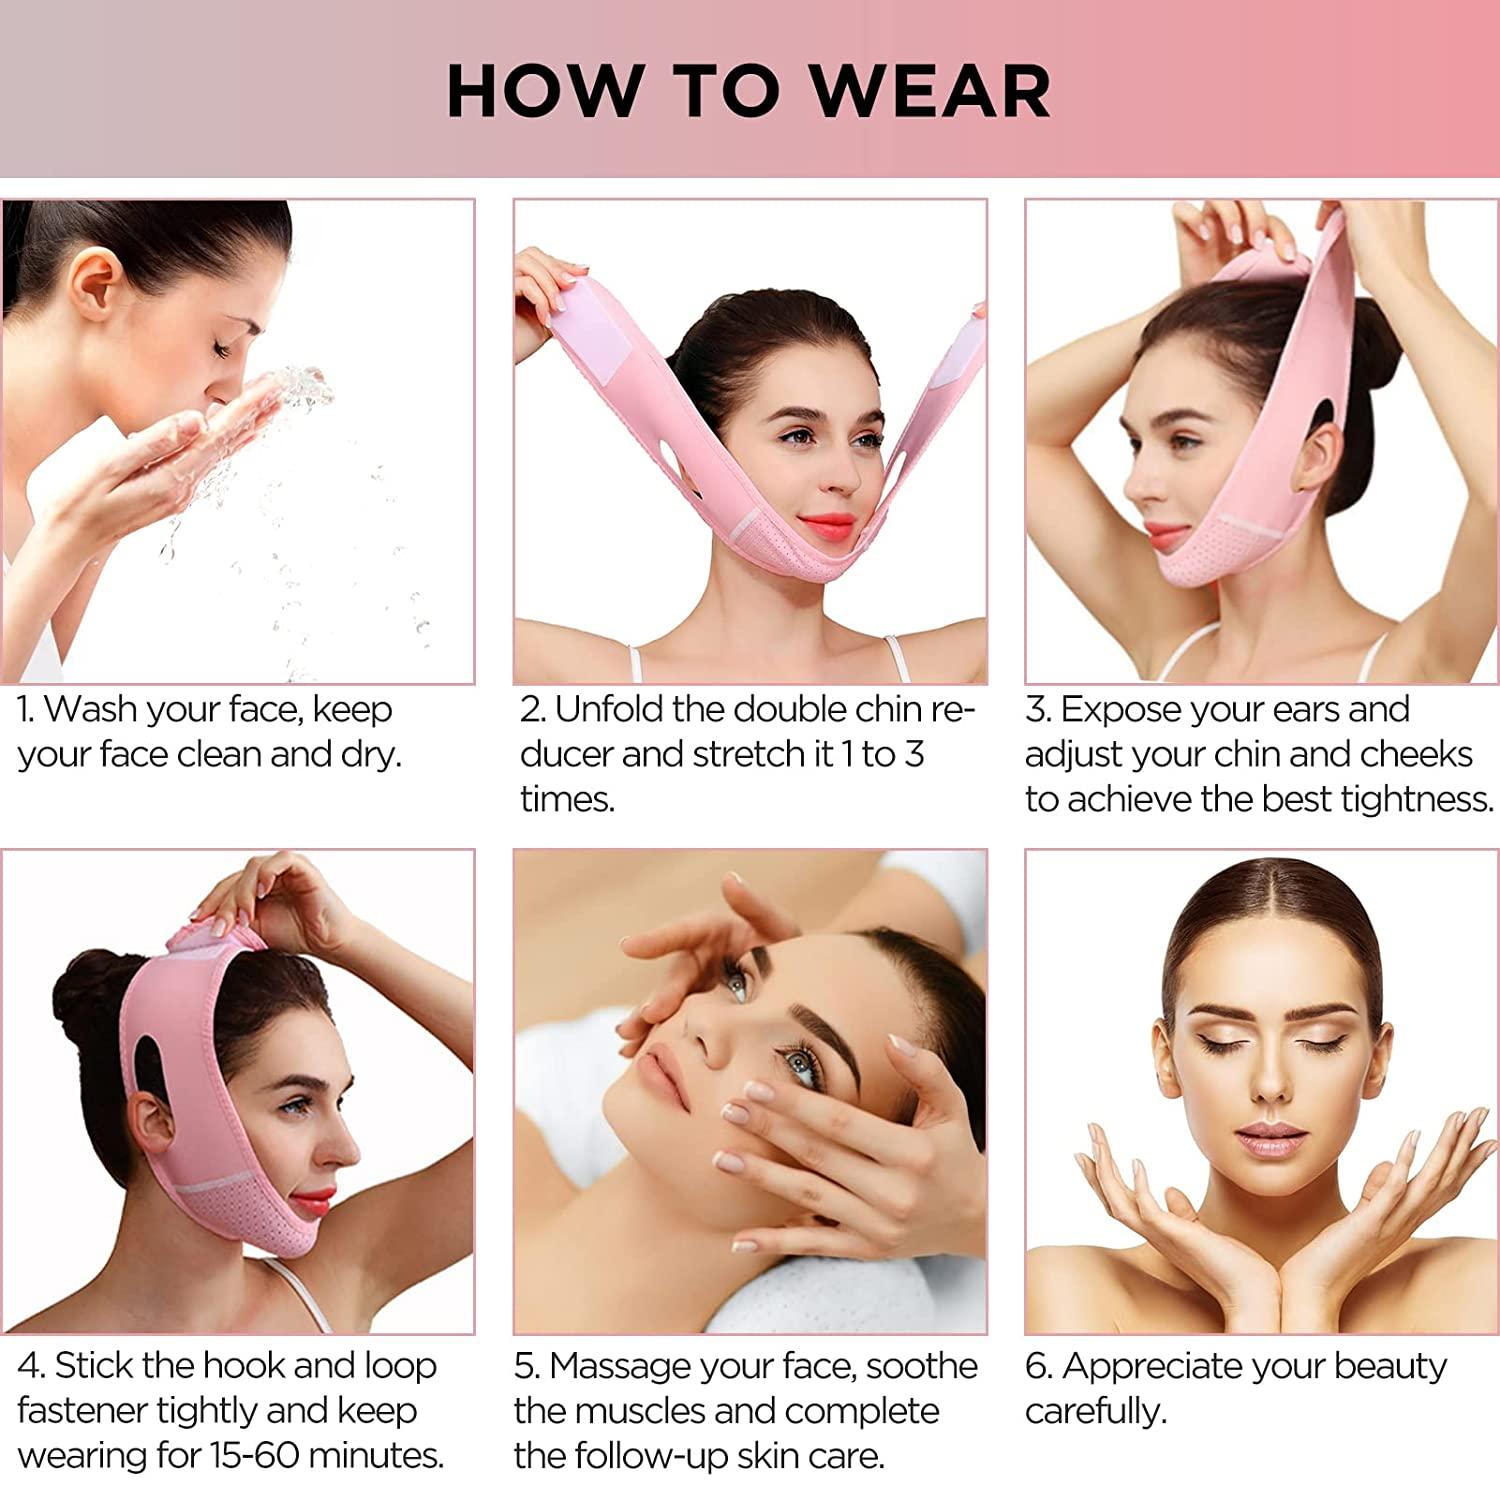 Facial Bandage For V-Line Lifting, Face Mask Bandage For Lifting, Face Lift  Sleeping Mask For Anti-Sagging, Facial Lifting Mask For Sleep, Exercise,  And Yoga. They Are Lightweight And Breathable.